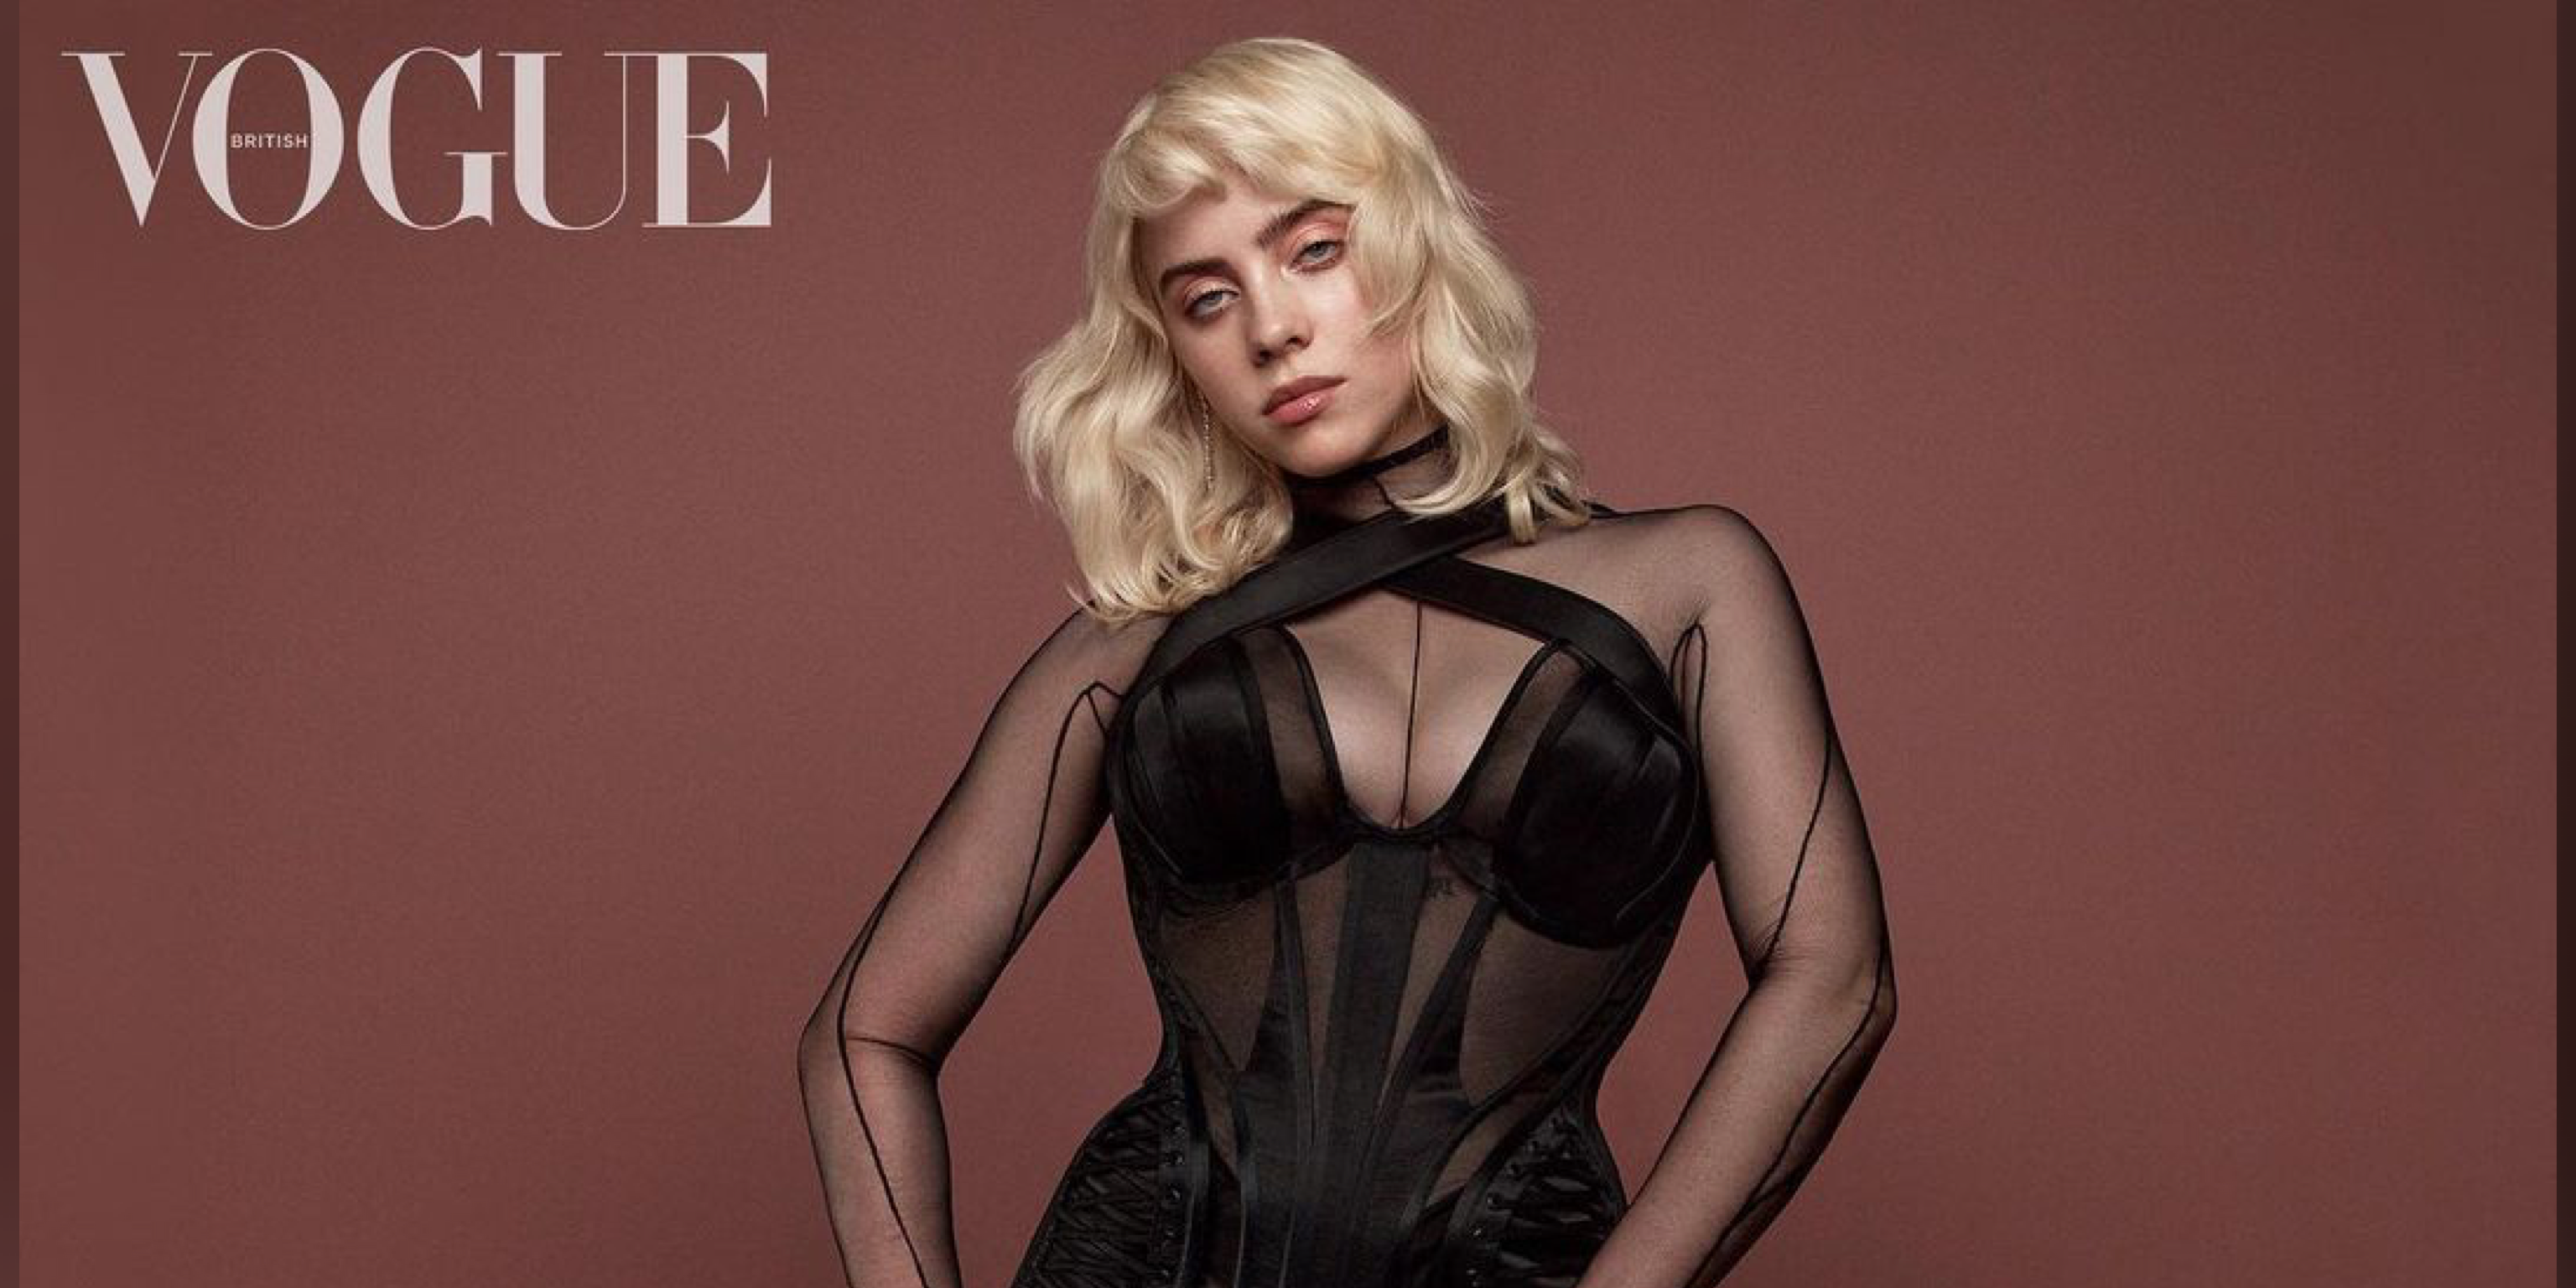 Billie Eilish swaps baggy clothes for lingerie, discusses body image in  latest issue of British Vogue